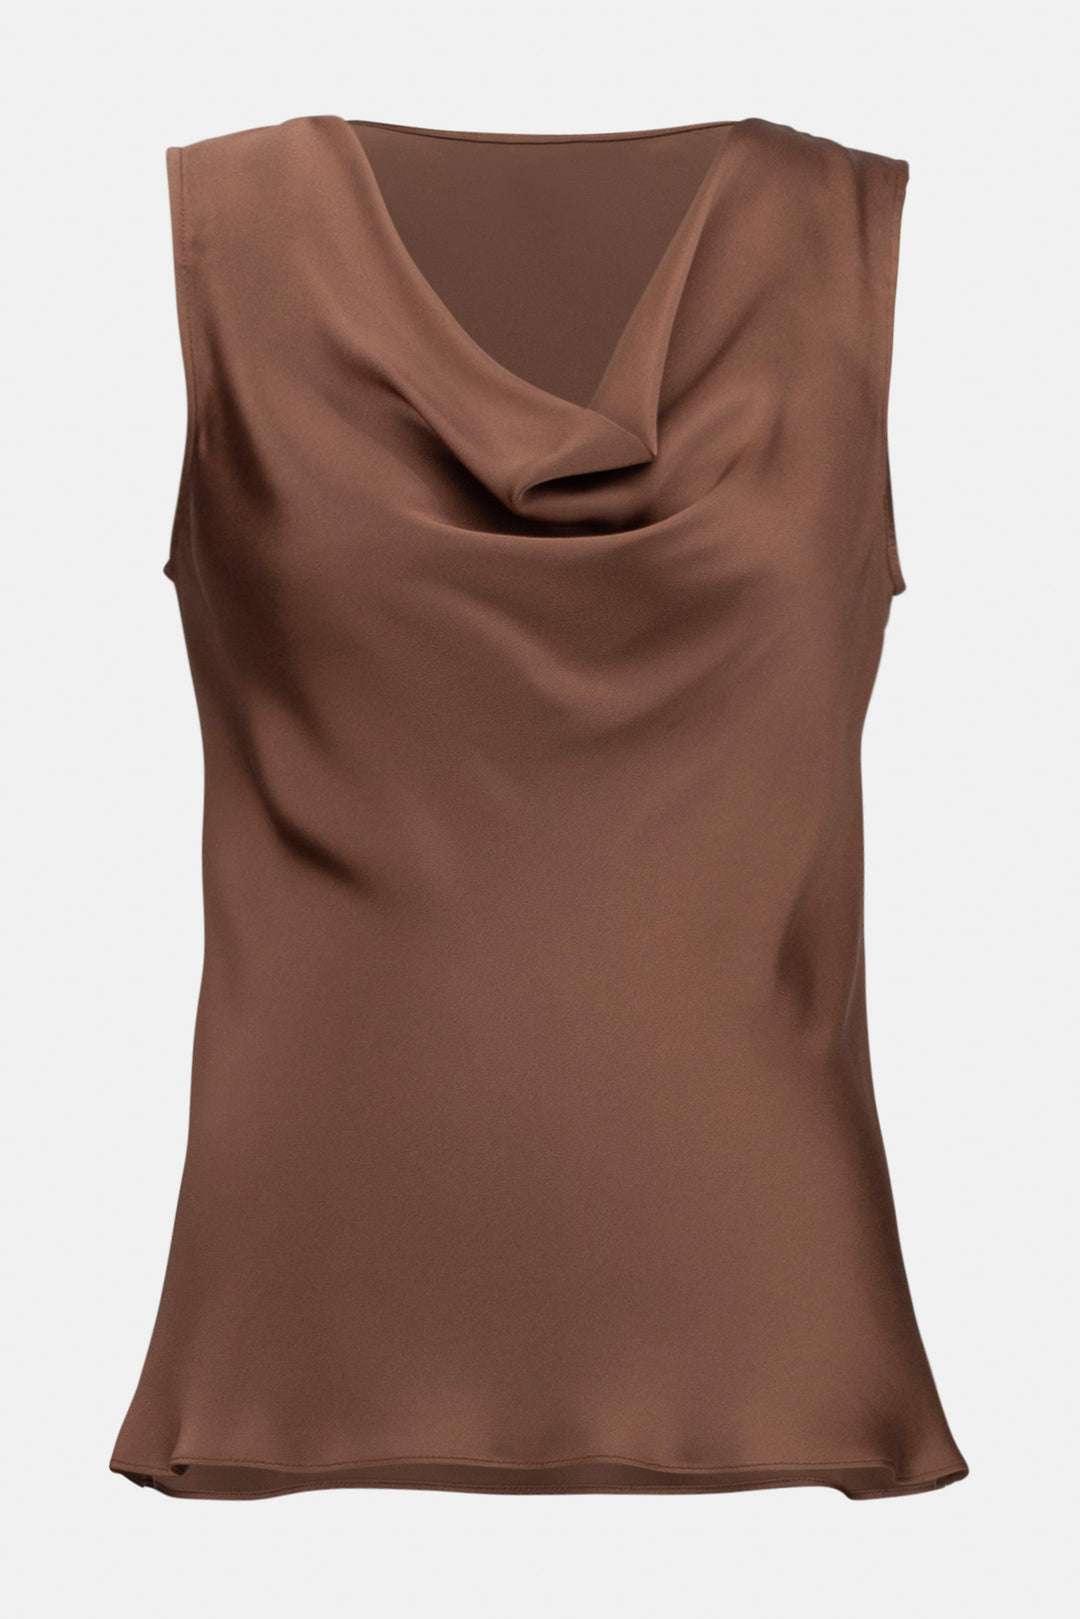 Joseph Ribkoff Fall 2023 women's business casual silk satin sleeveless tunic blouse top - toffee product front